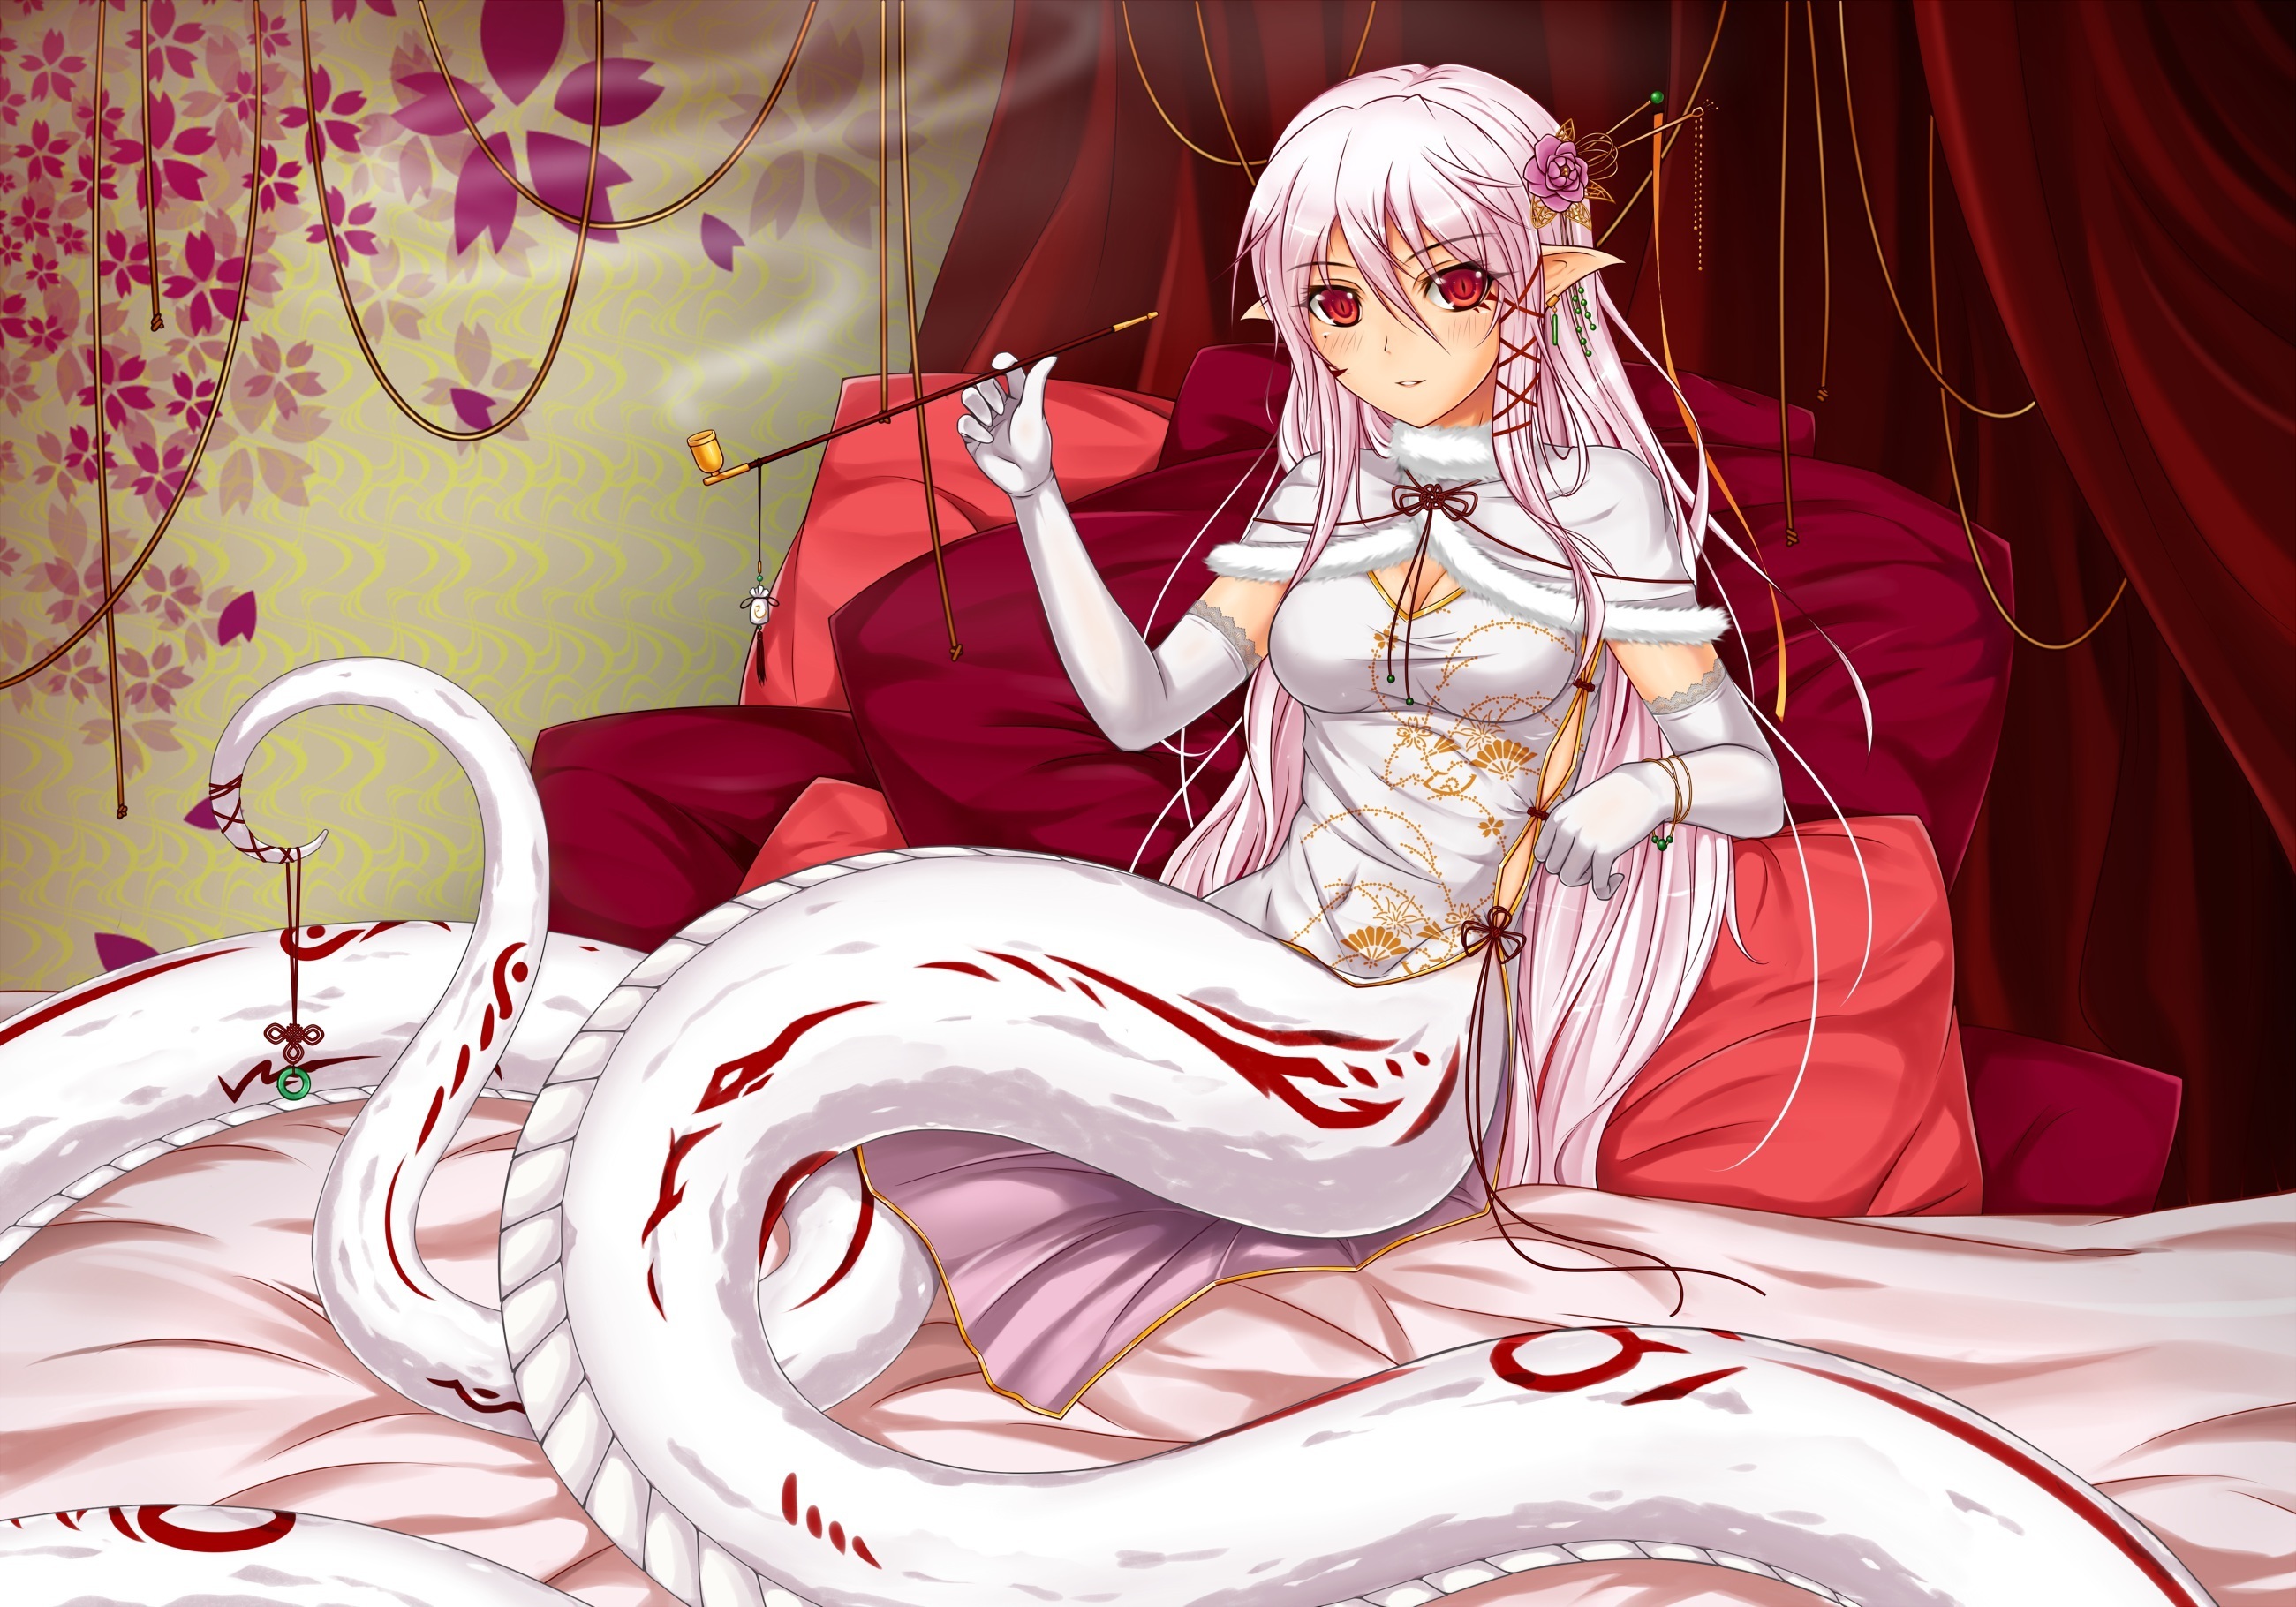 midnight,  artist , Mangaka, Bed, Bedroom, Blush, Cheongsam, Chinese, Clothes, Dress, Female, Flower, Gloves, Hair, Ornament, Lamia, Long, Hair, Looking, At, Camera, Pillow, Pink, Hair, Pointy, Ears, Red, Eyes, S Wallpaper